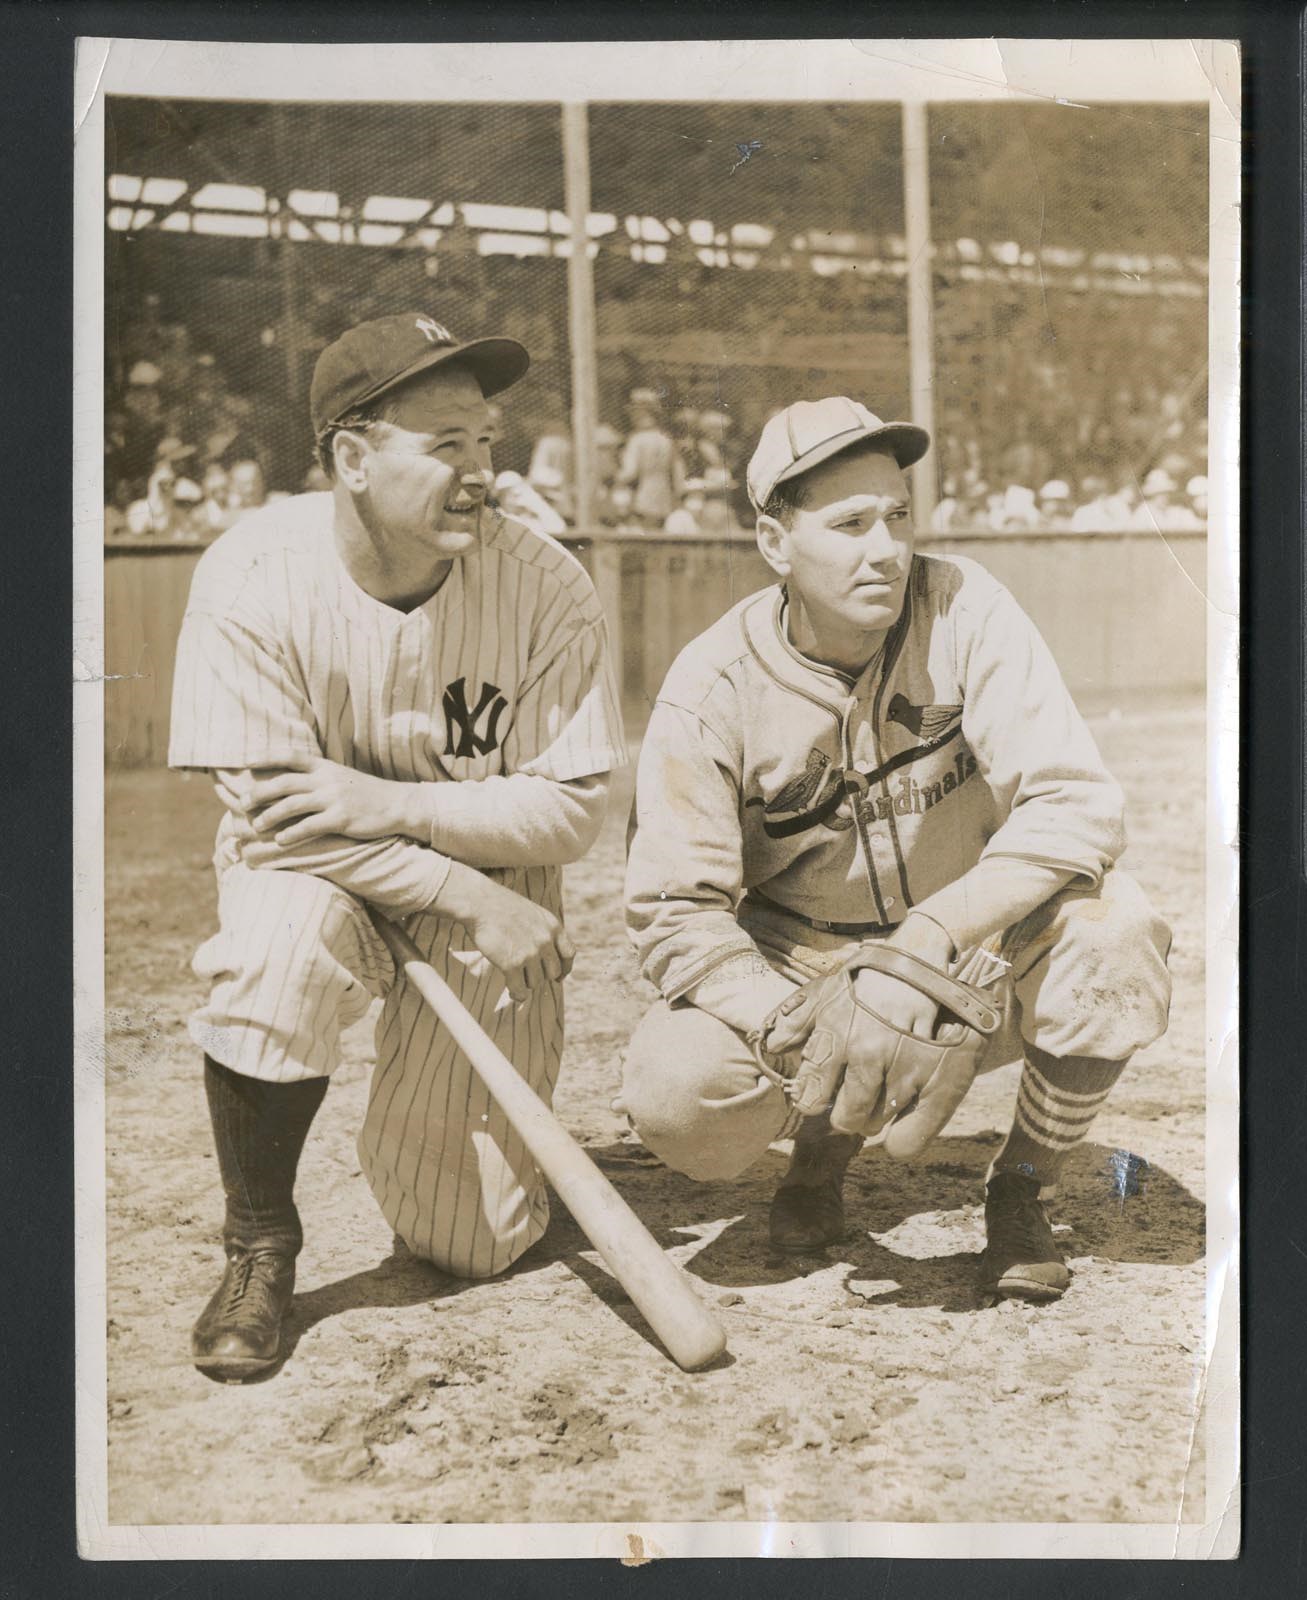 - 1937 Lou Gehrig and Dizzy Dean "Holding Out" Photo Type 1